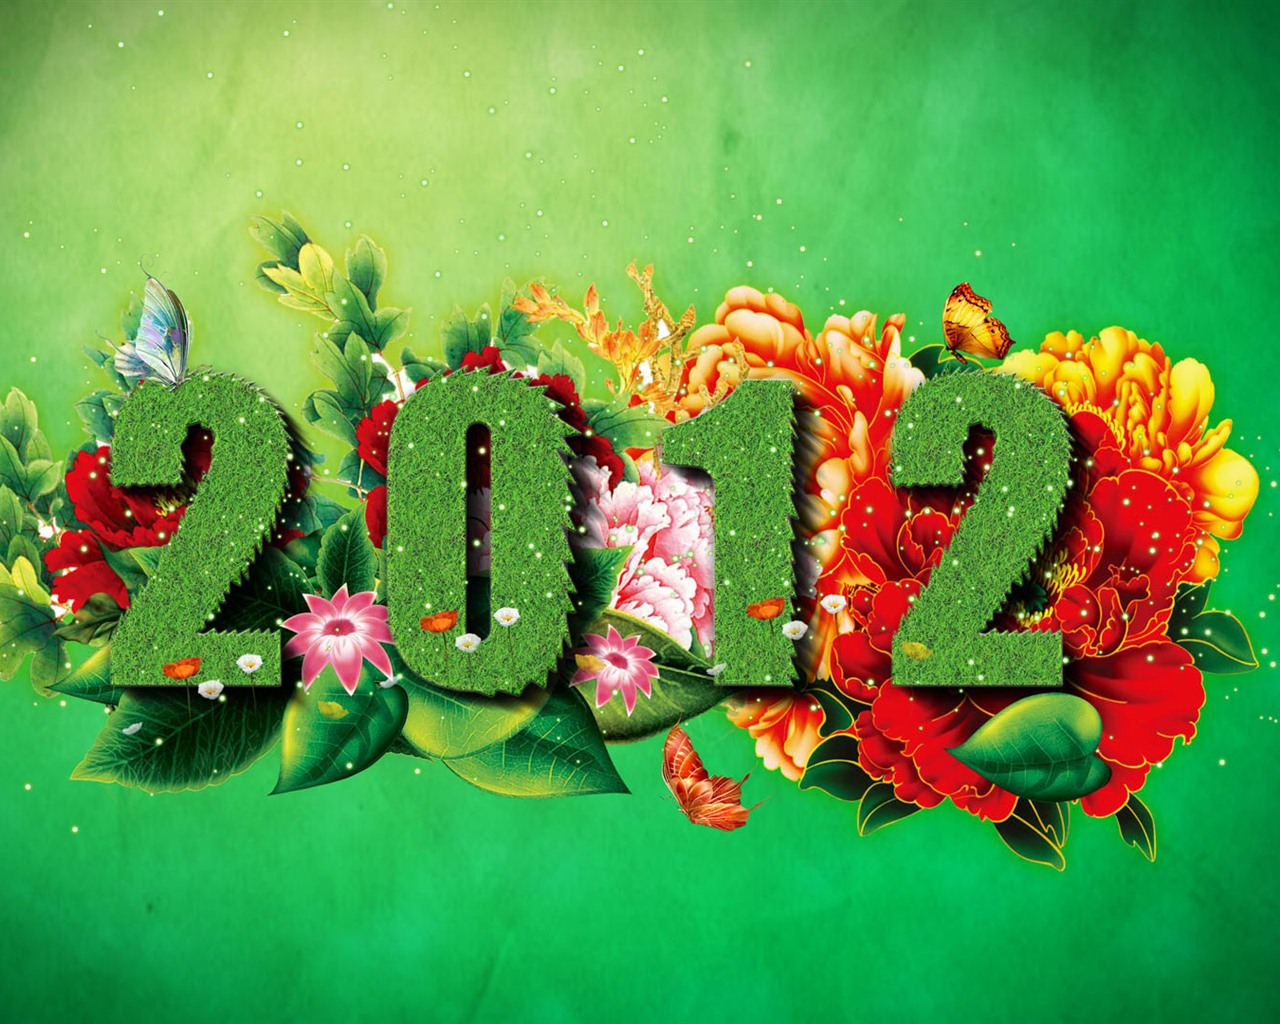 2012 New Year wallpapers (1) #19 - 1280x1024